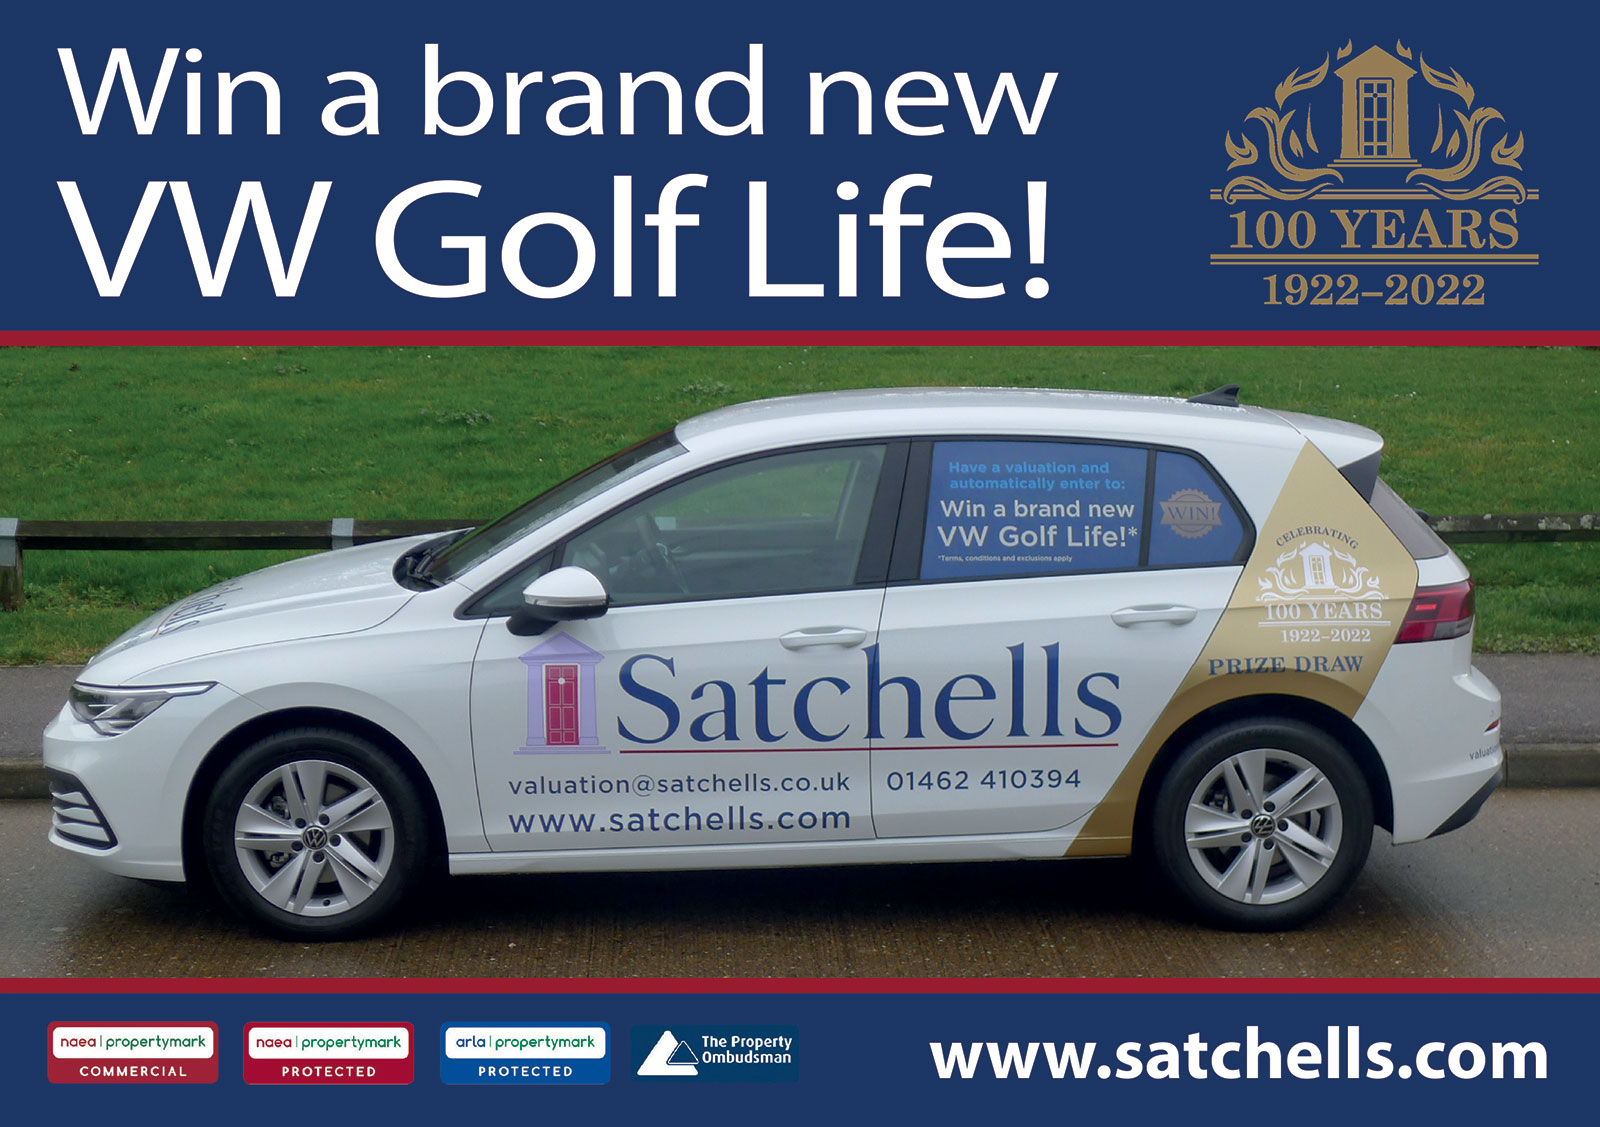 Win a brand new VW Golf Life